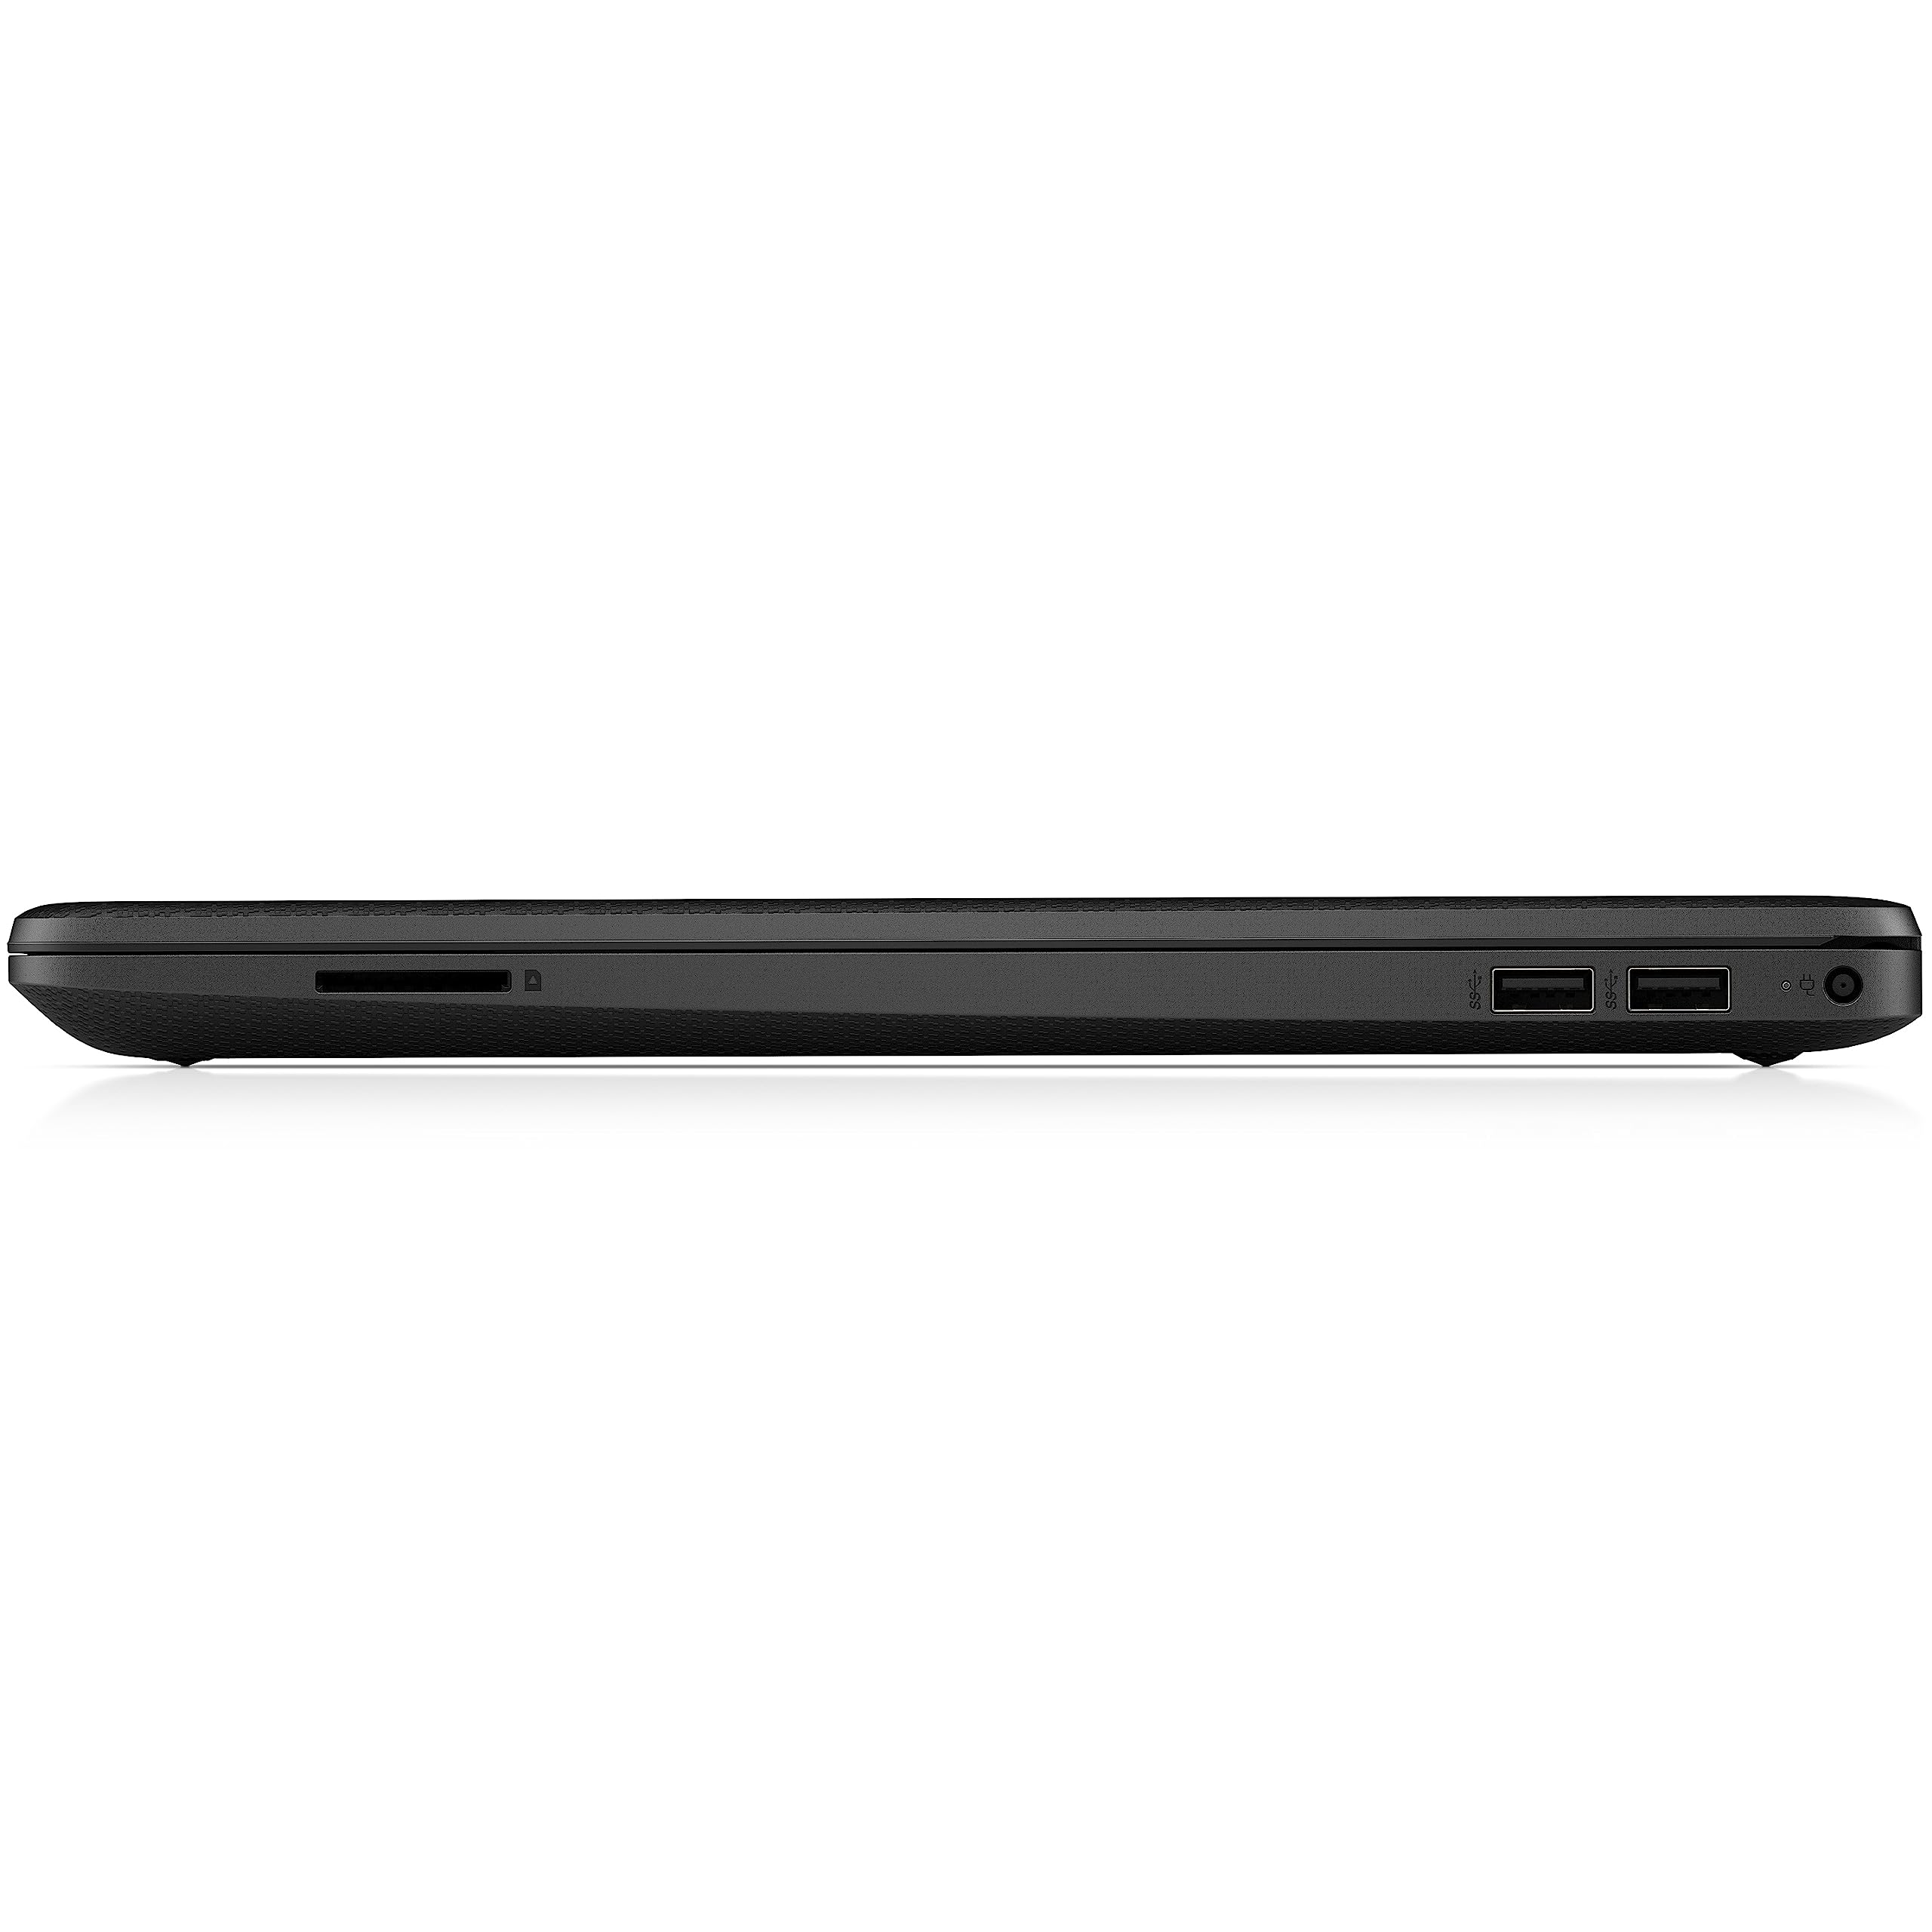 HP 15 15.6" Laptop Computer, Intel Pentium Silver N5030 Quad-Core up to 3.1GHz, 4GB DDR4 RAM, 128GB SSD, 802.11AC WiFi, Bluetooth, 1-Year Office 365, Black, Windows 11 Home S, BROAG Cable